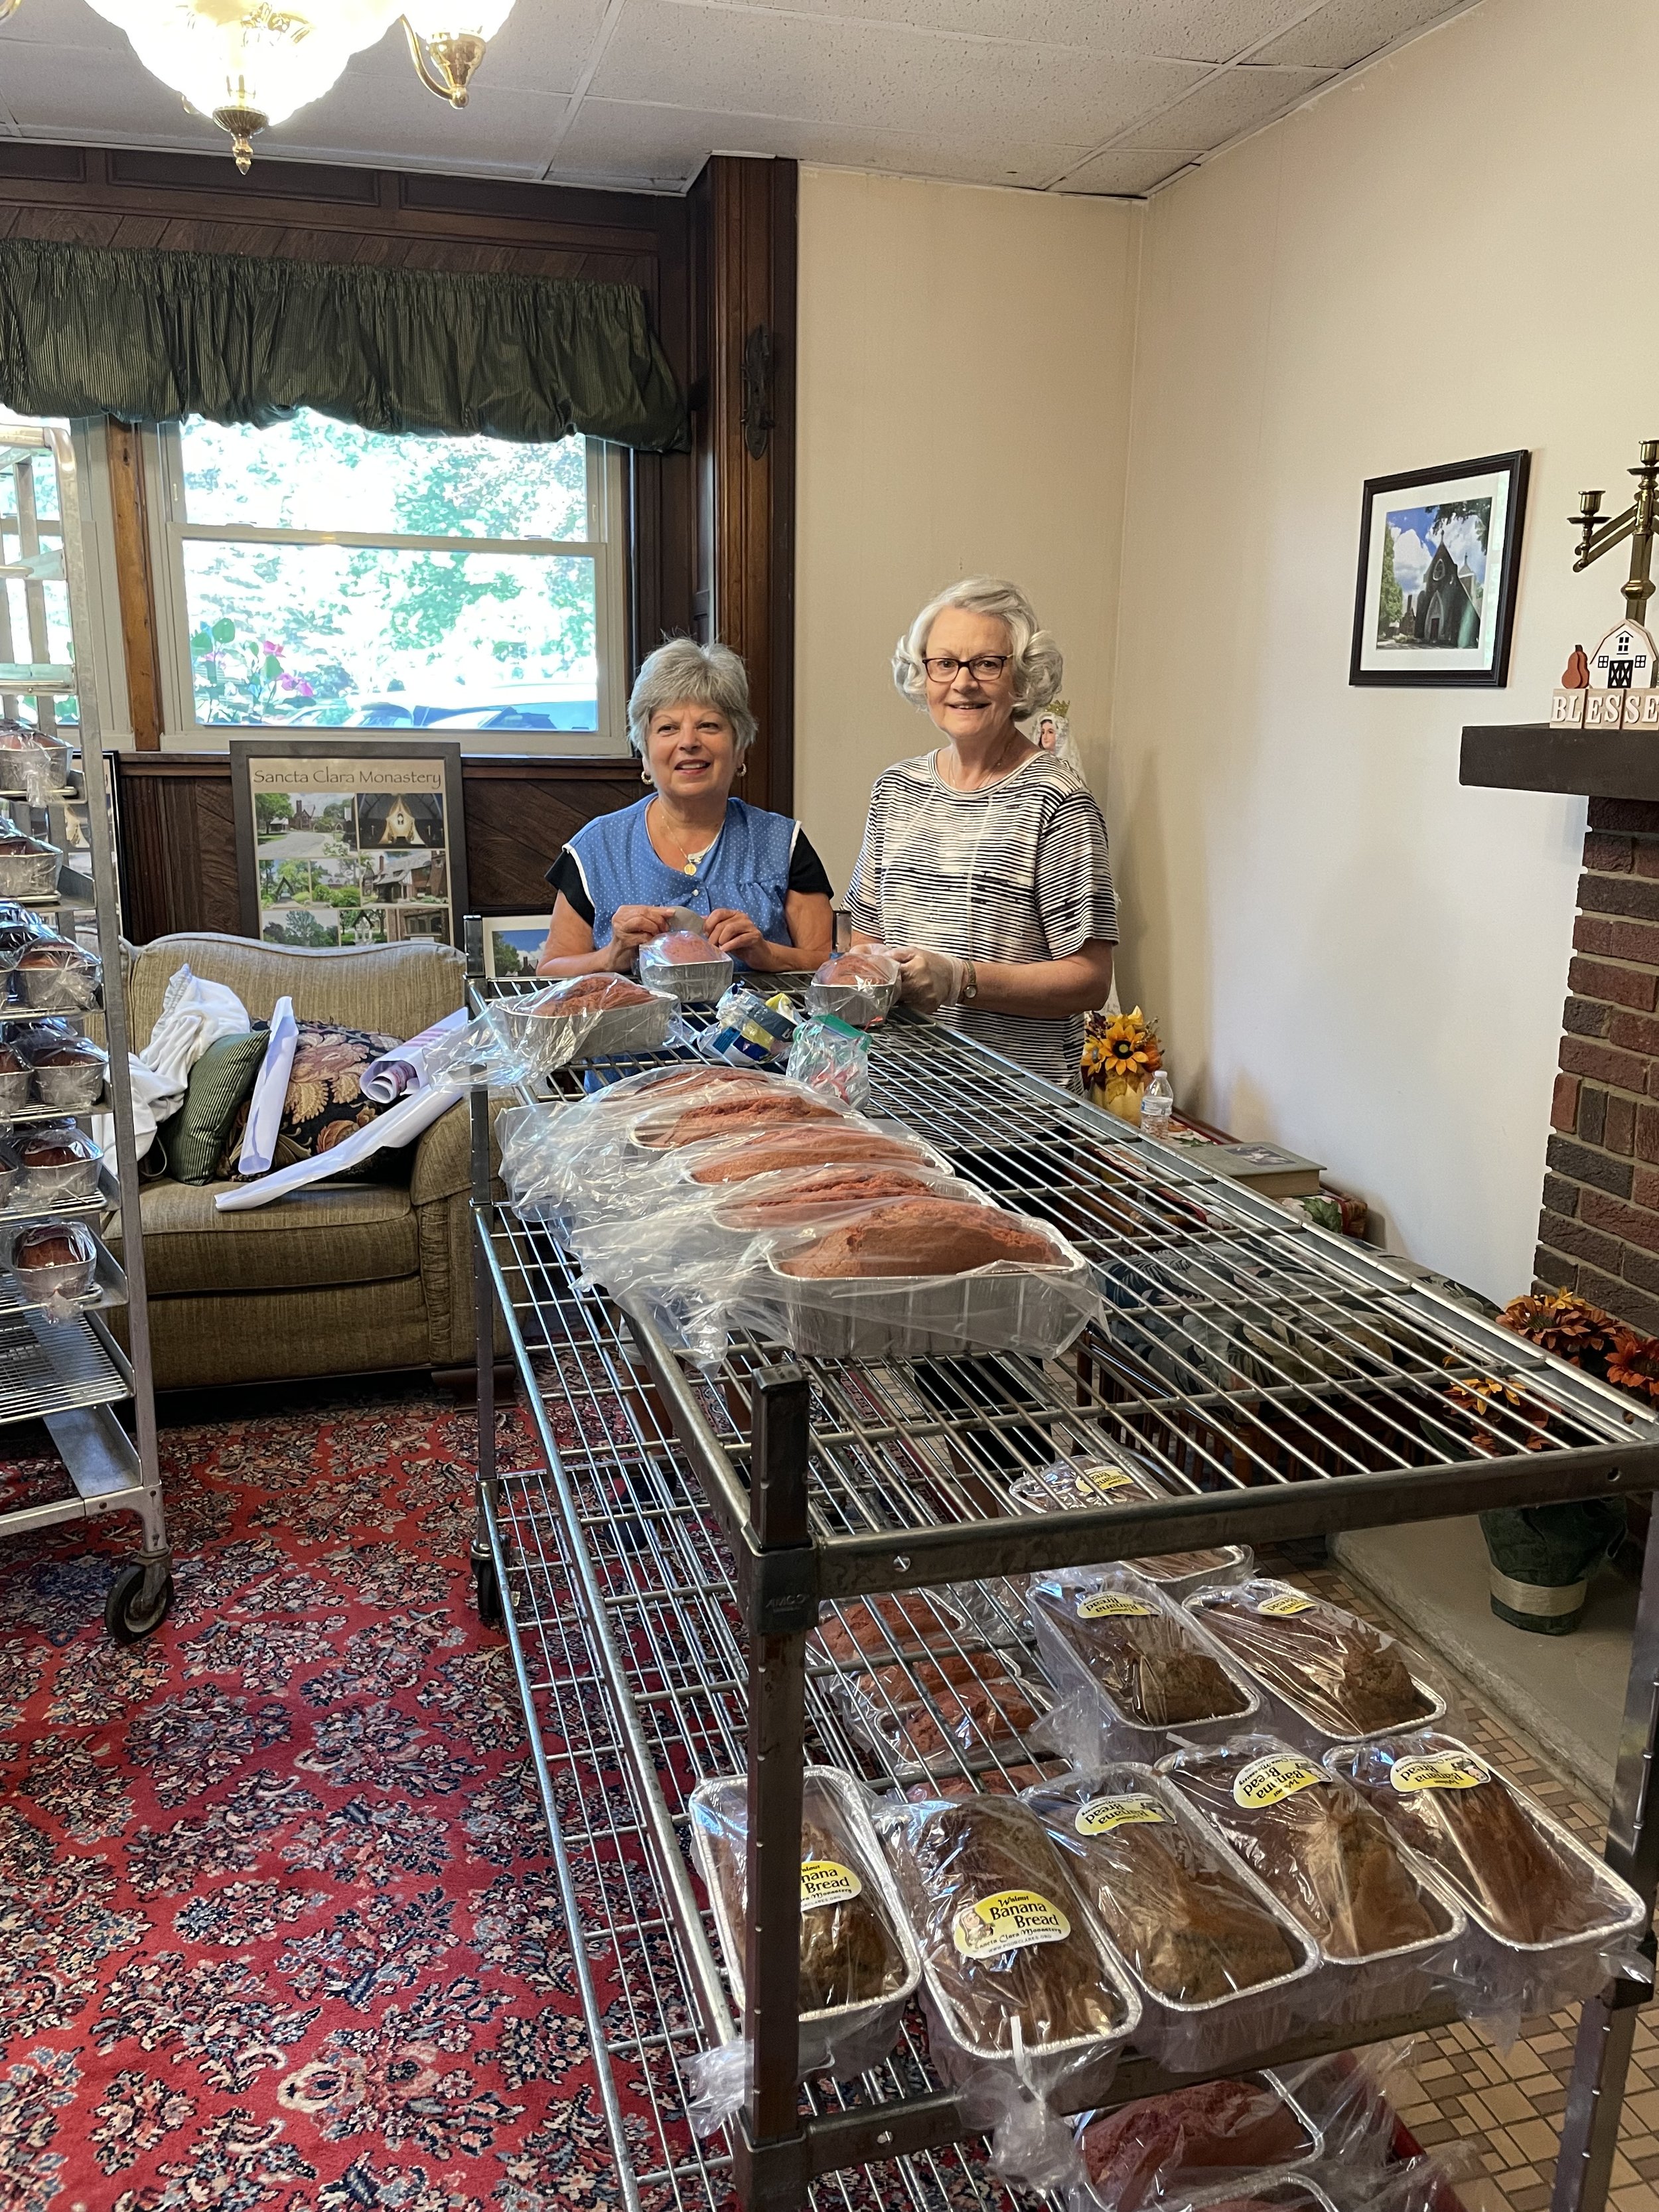  Our bagging bread crew: Pat and Deb 